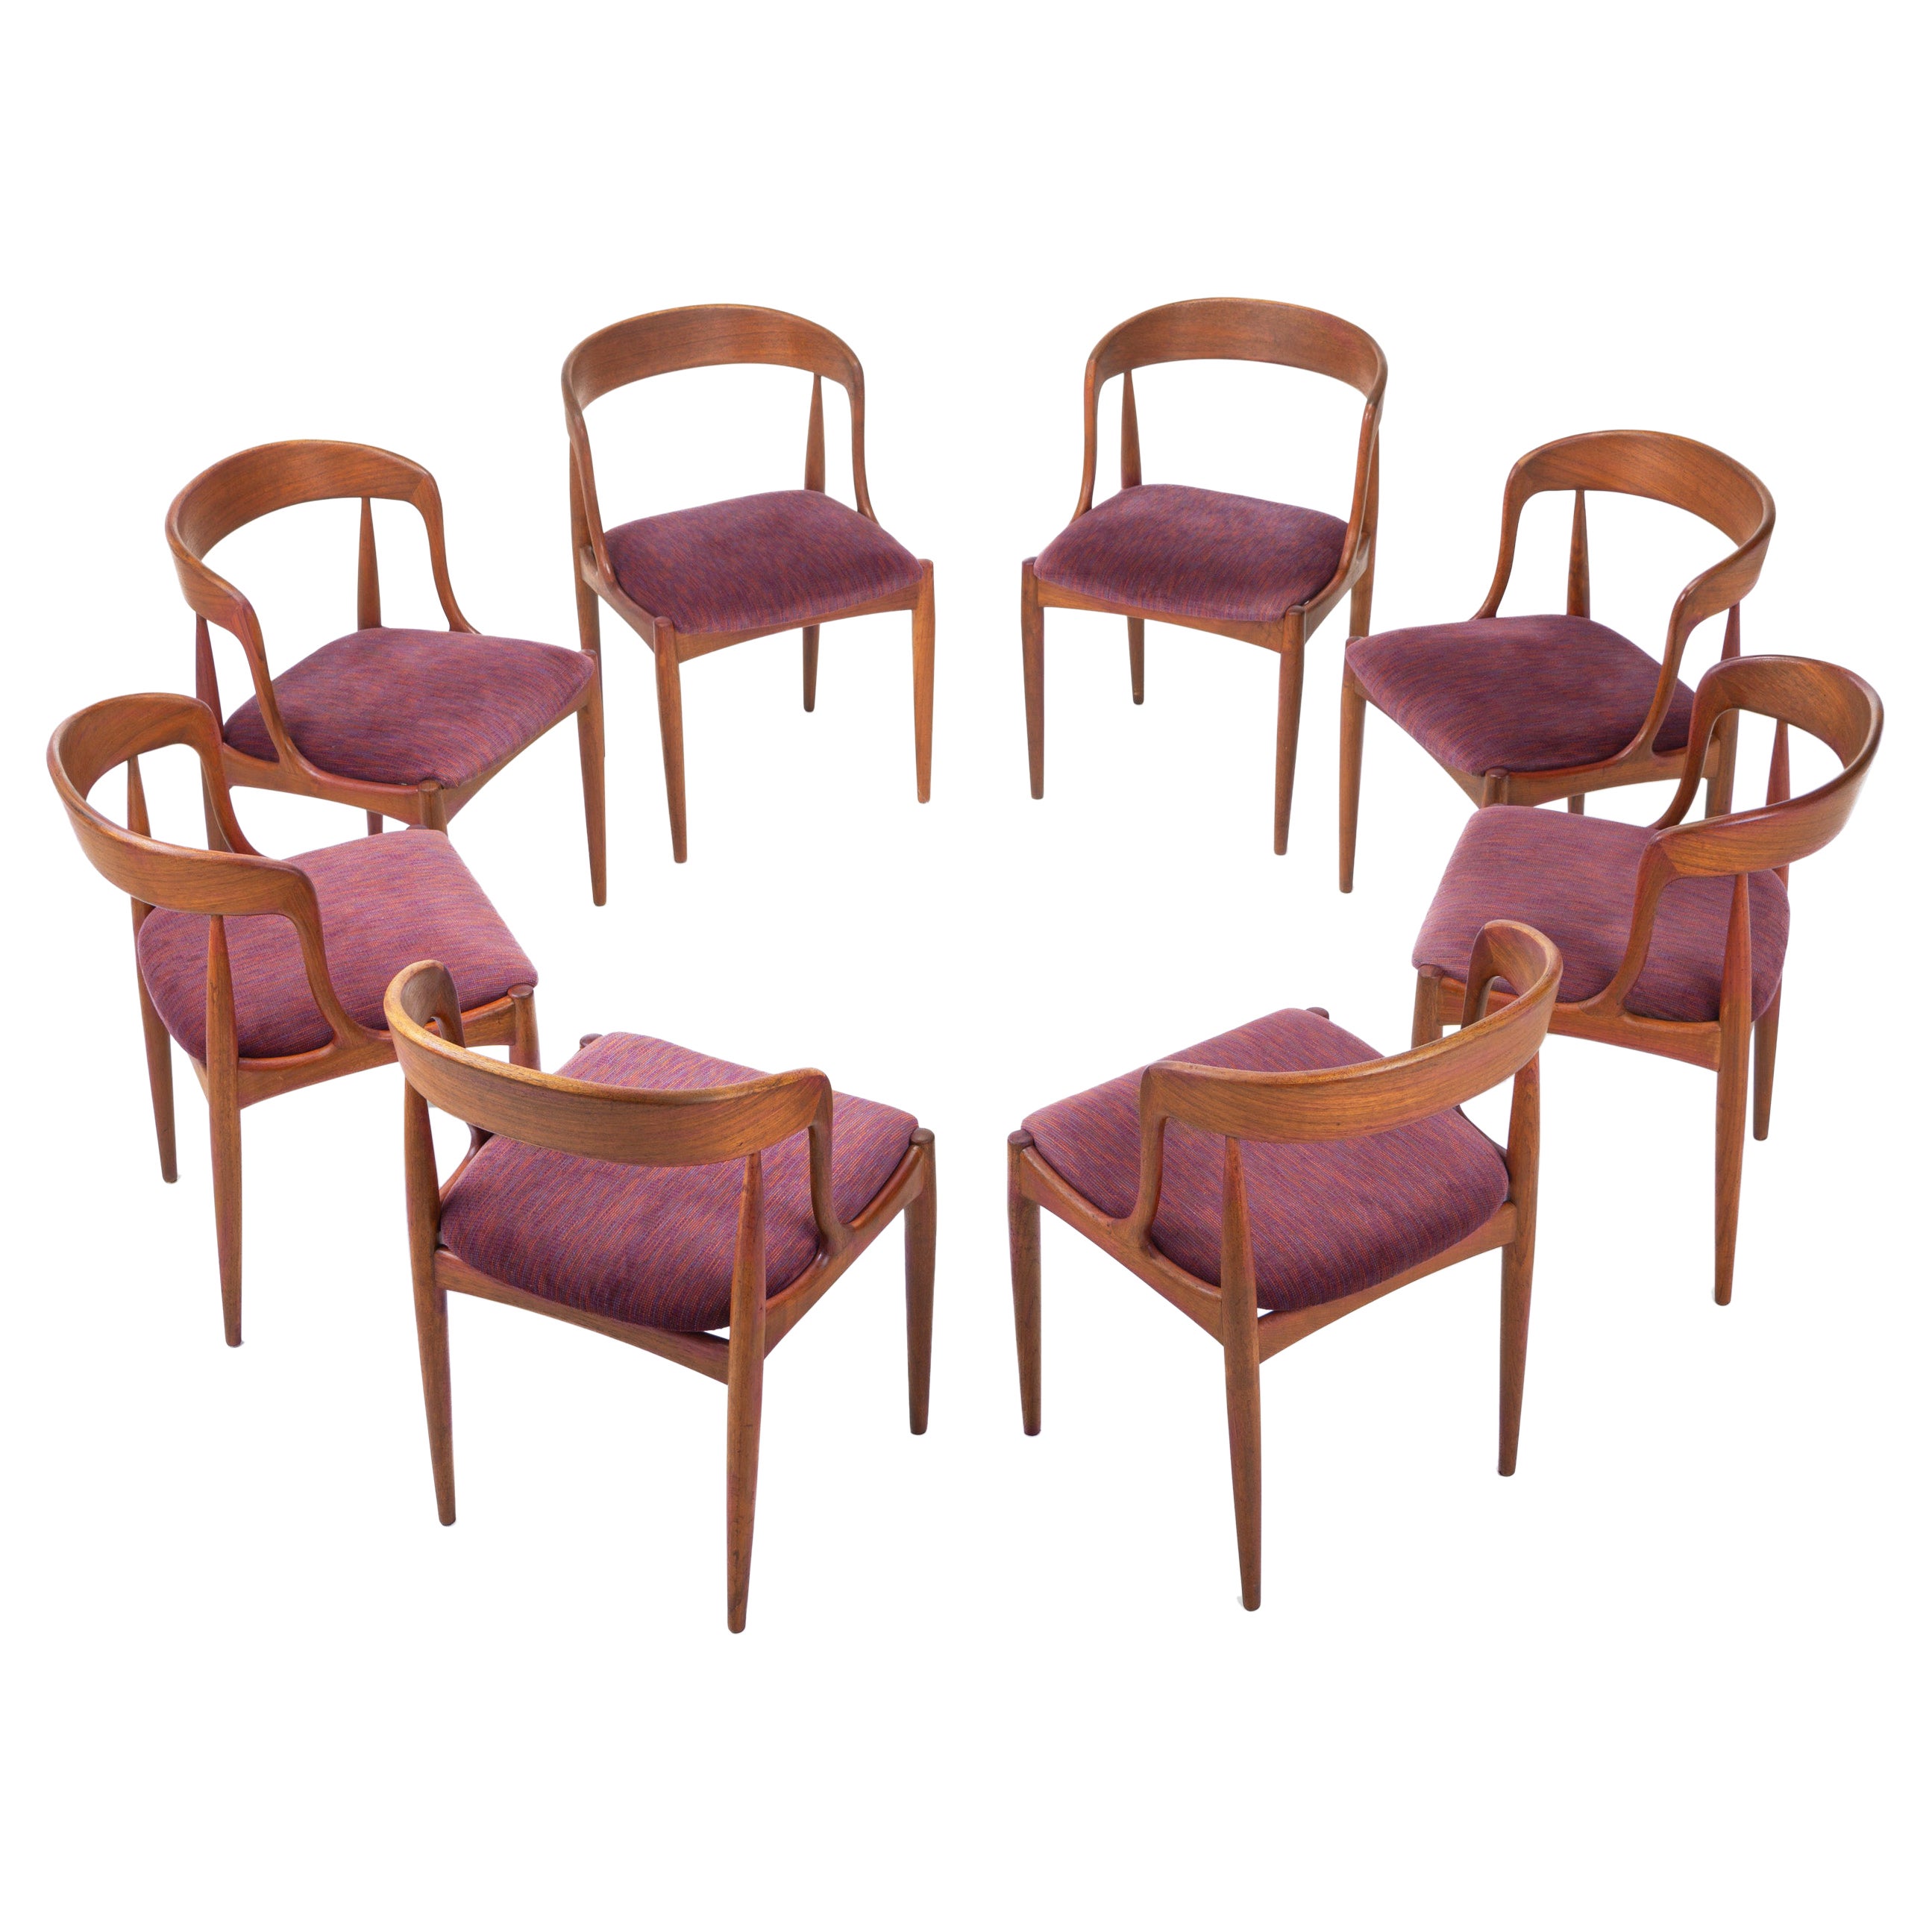 Set of 8 dining chairs by Johannes Andersen for Uldum, Denmark 1960s